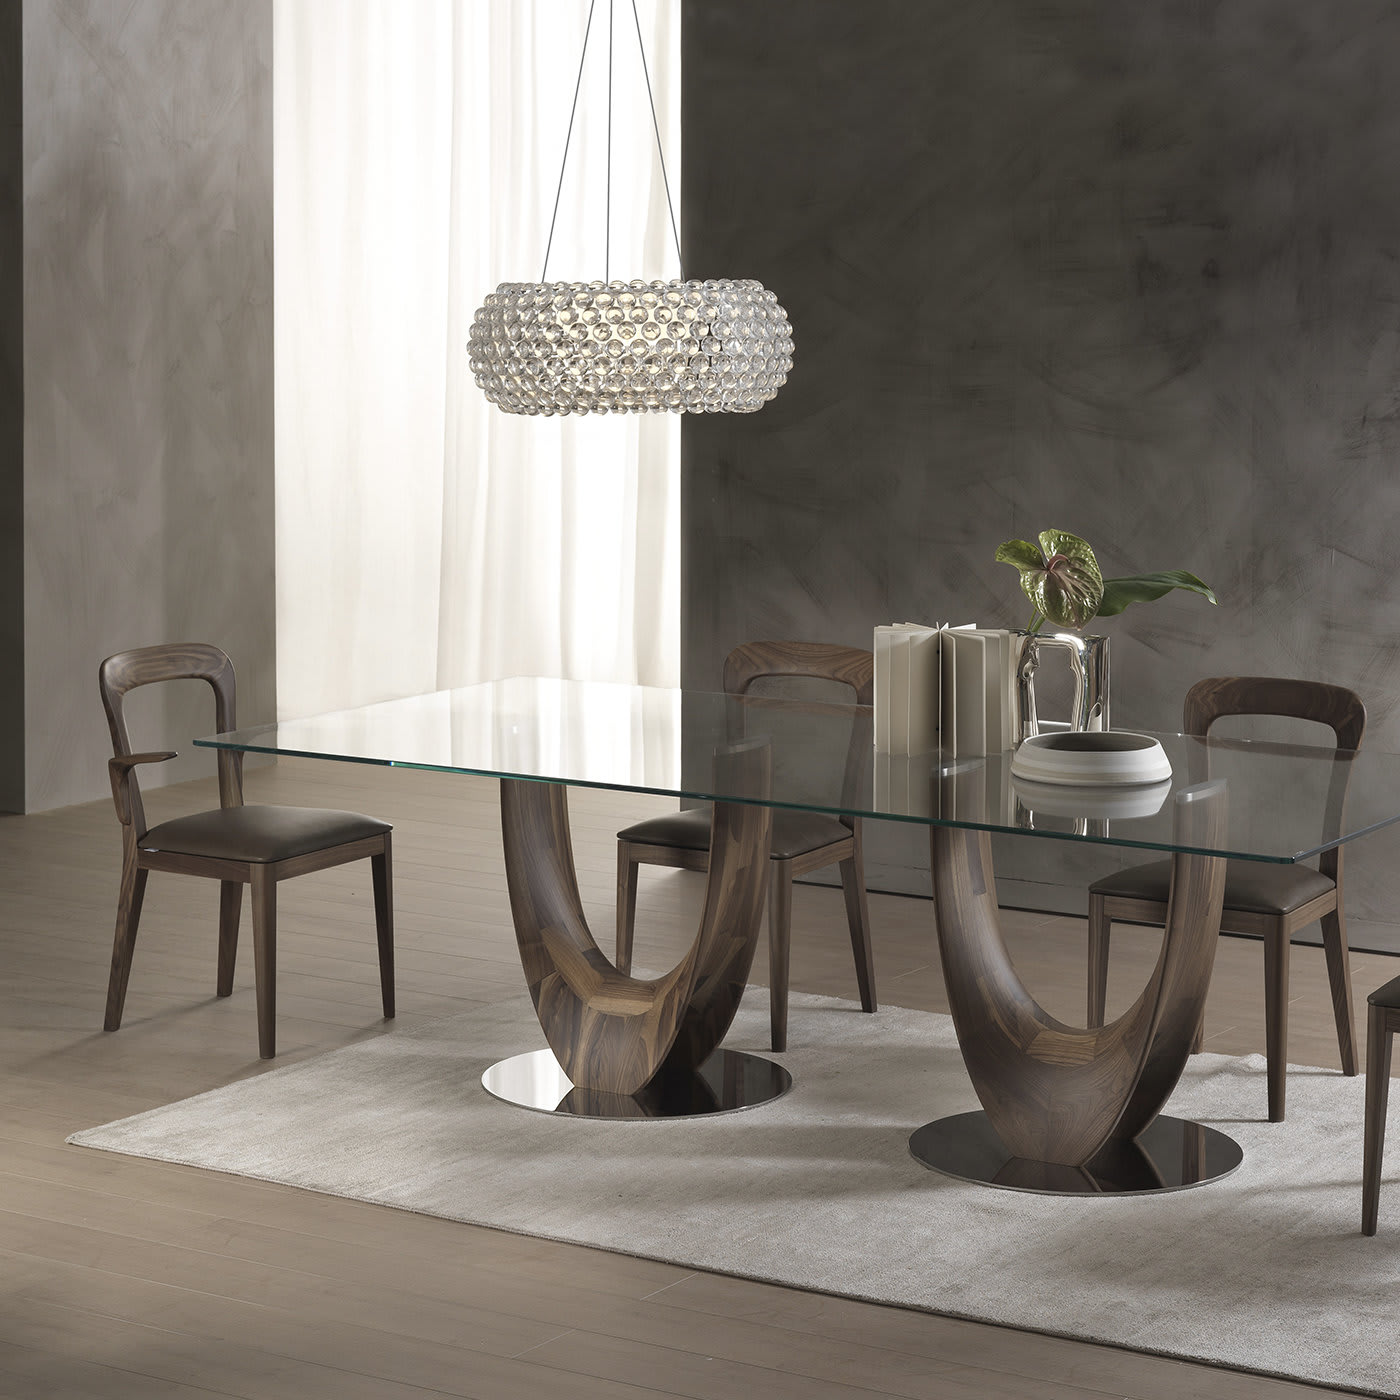 Axis Large Dining with Clear Glass Top Table by Stefano Bigi - Pacini & Cappellini